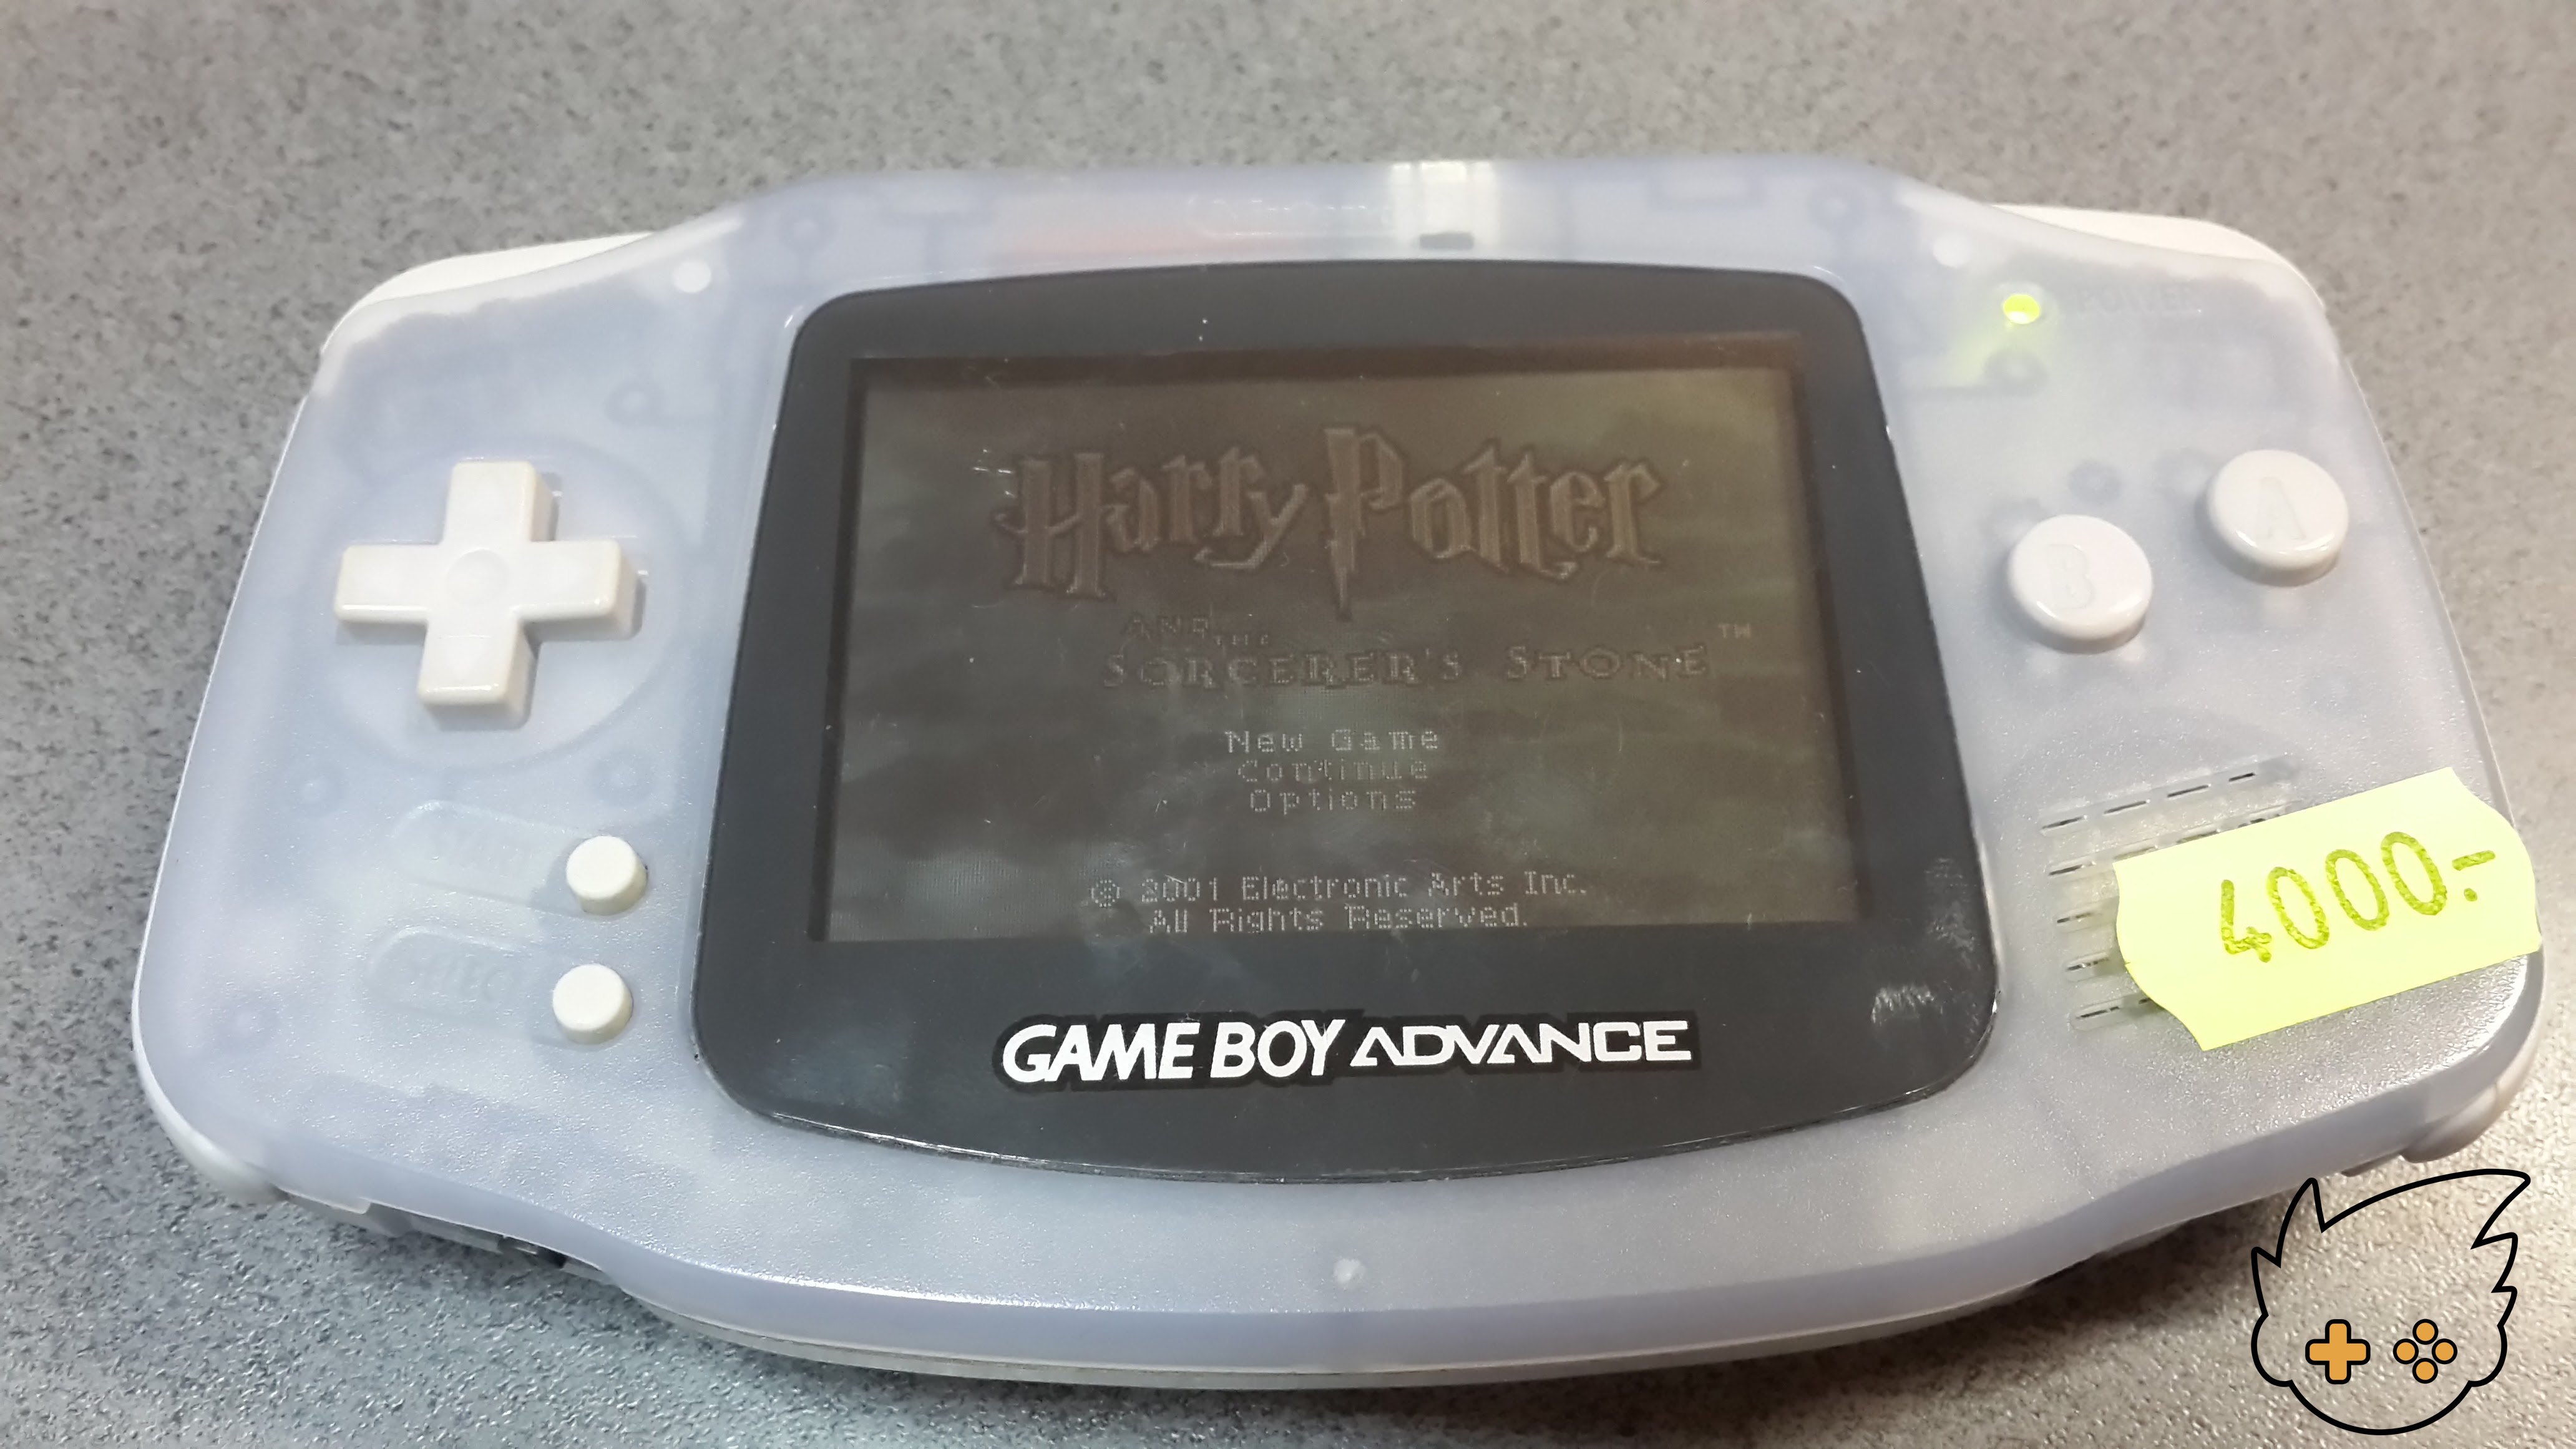 GBA SP went black and white, using an everdrive, could one of them Roms I  downloaded have anything to do with this : r/GameboyAdvance